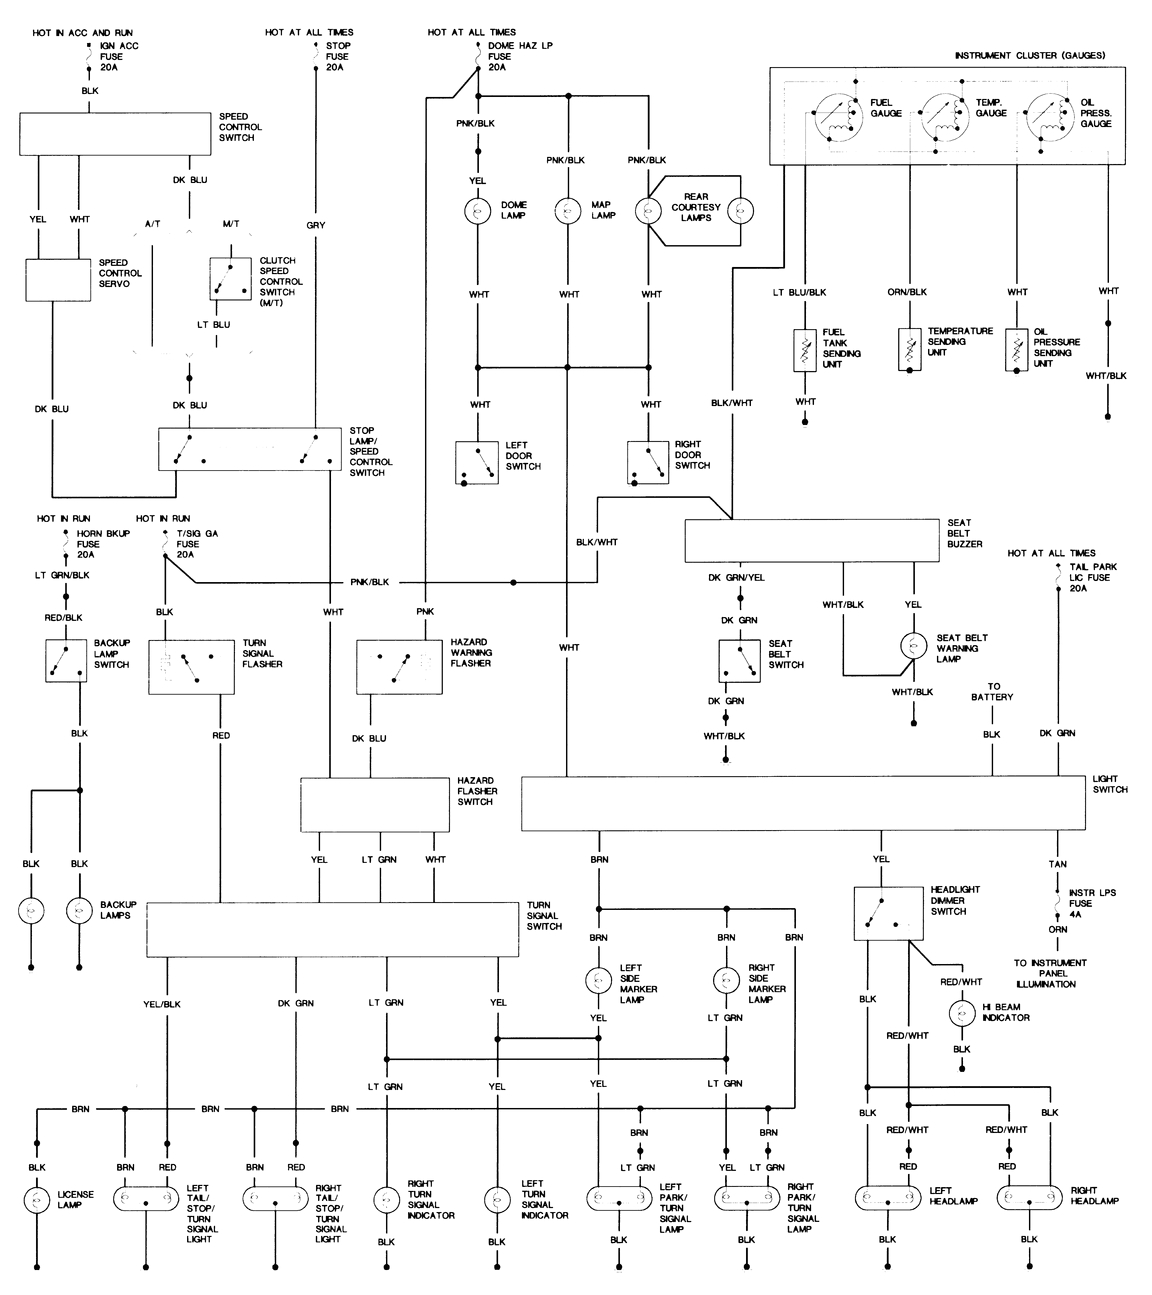 dodge power wagon wiring diagram wiring diagramcan i get a wiring schematic and voltage ohm specs